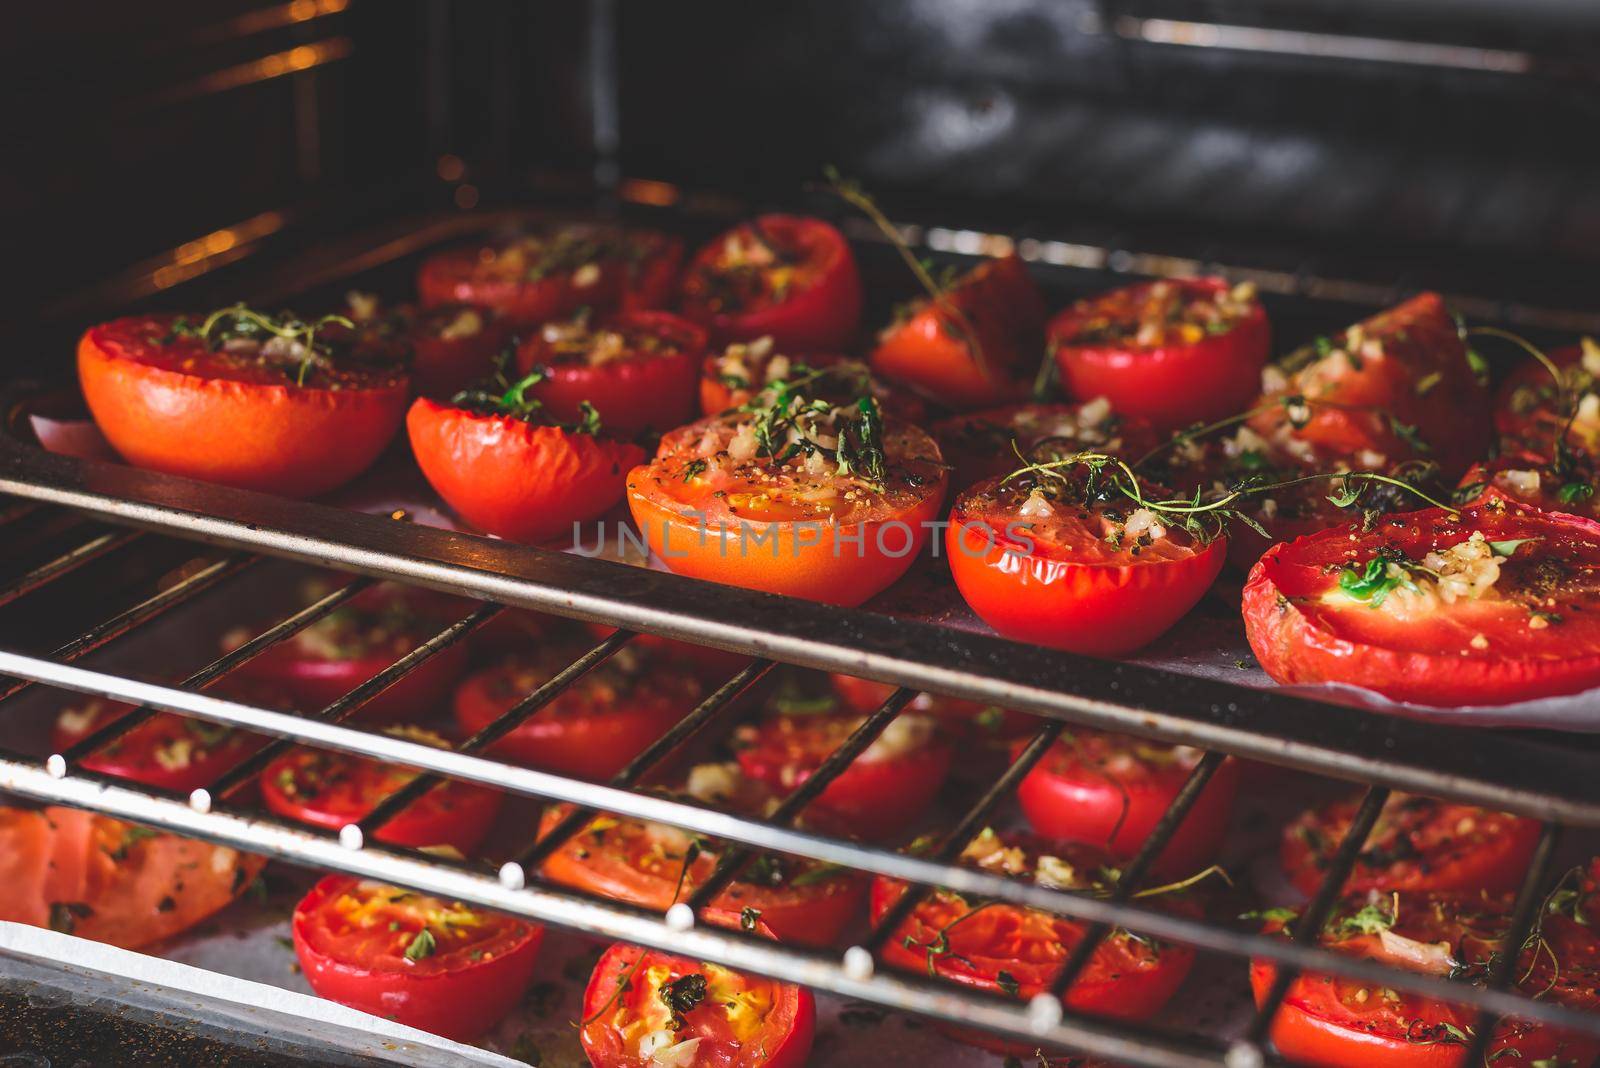 Preparing Halved Tomatoes with Herbs and Garlic on Baking Sheet in Oven for Preserving